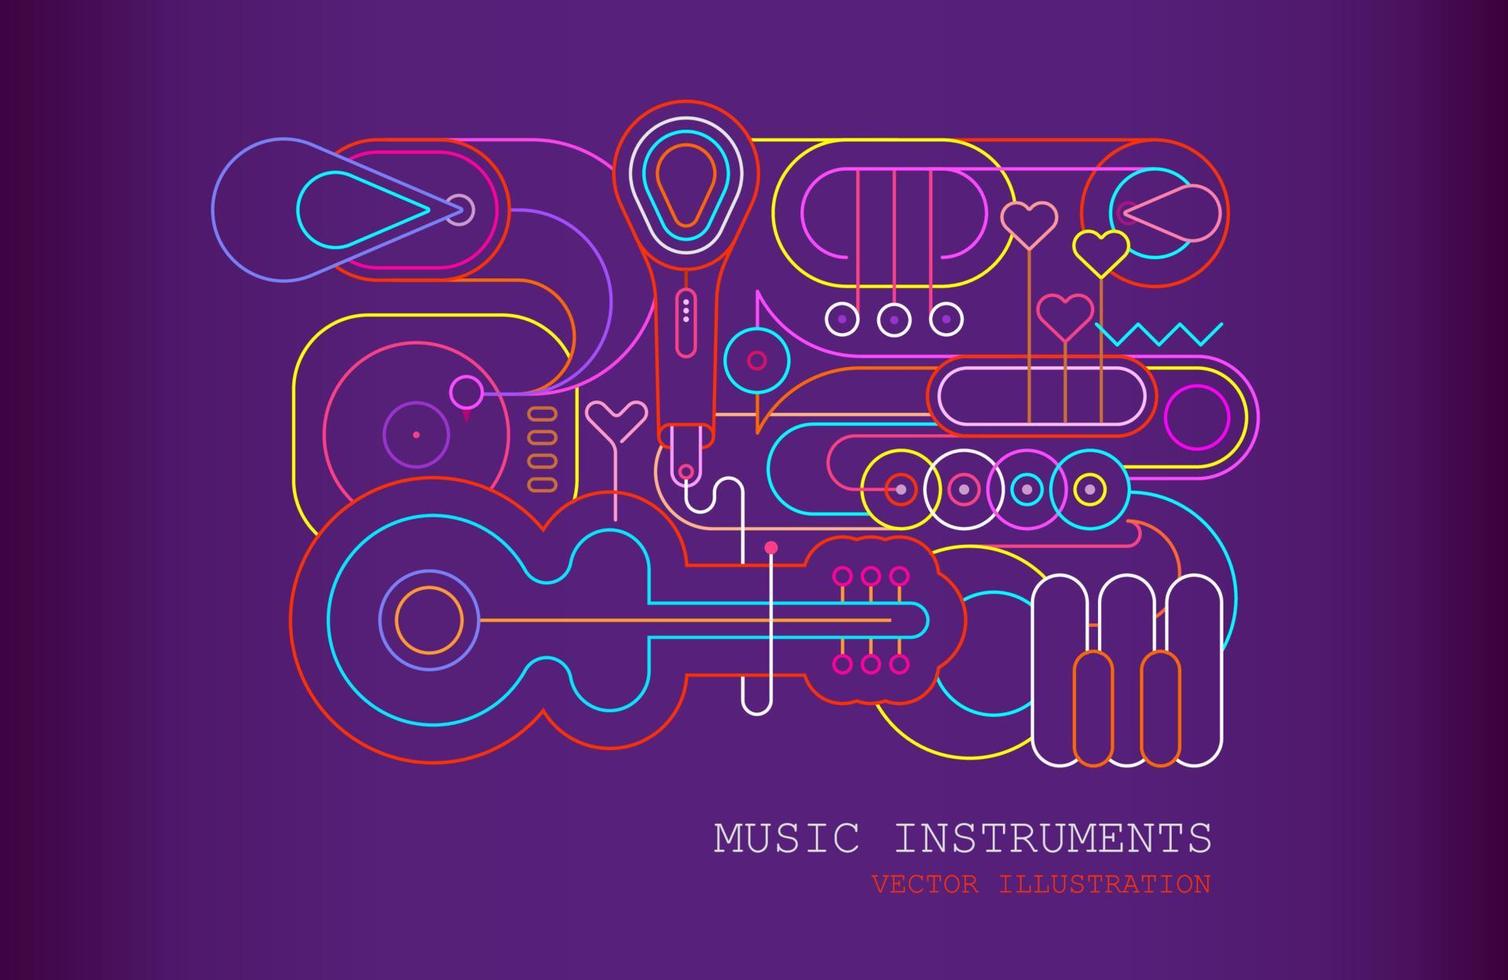 Musical Istrument Line Art Silhouettes vector